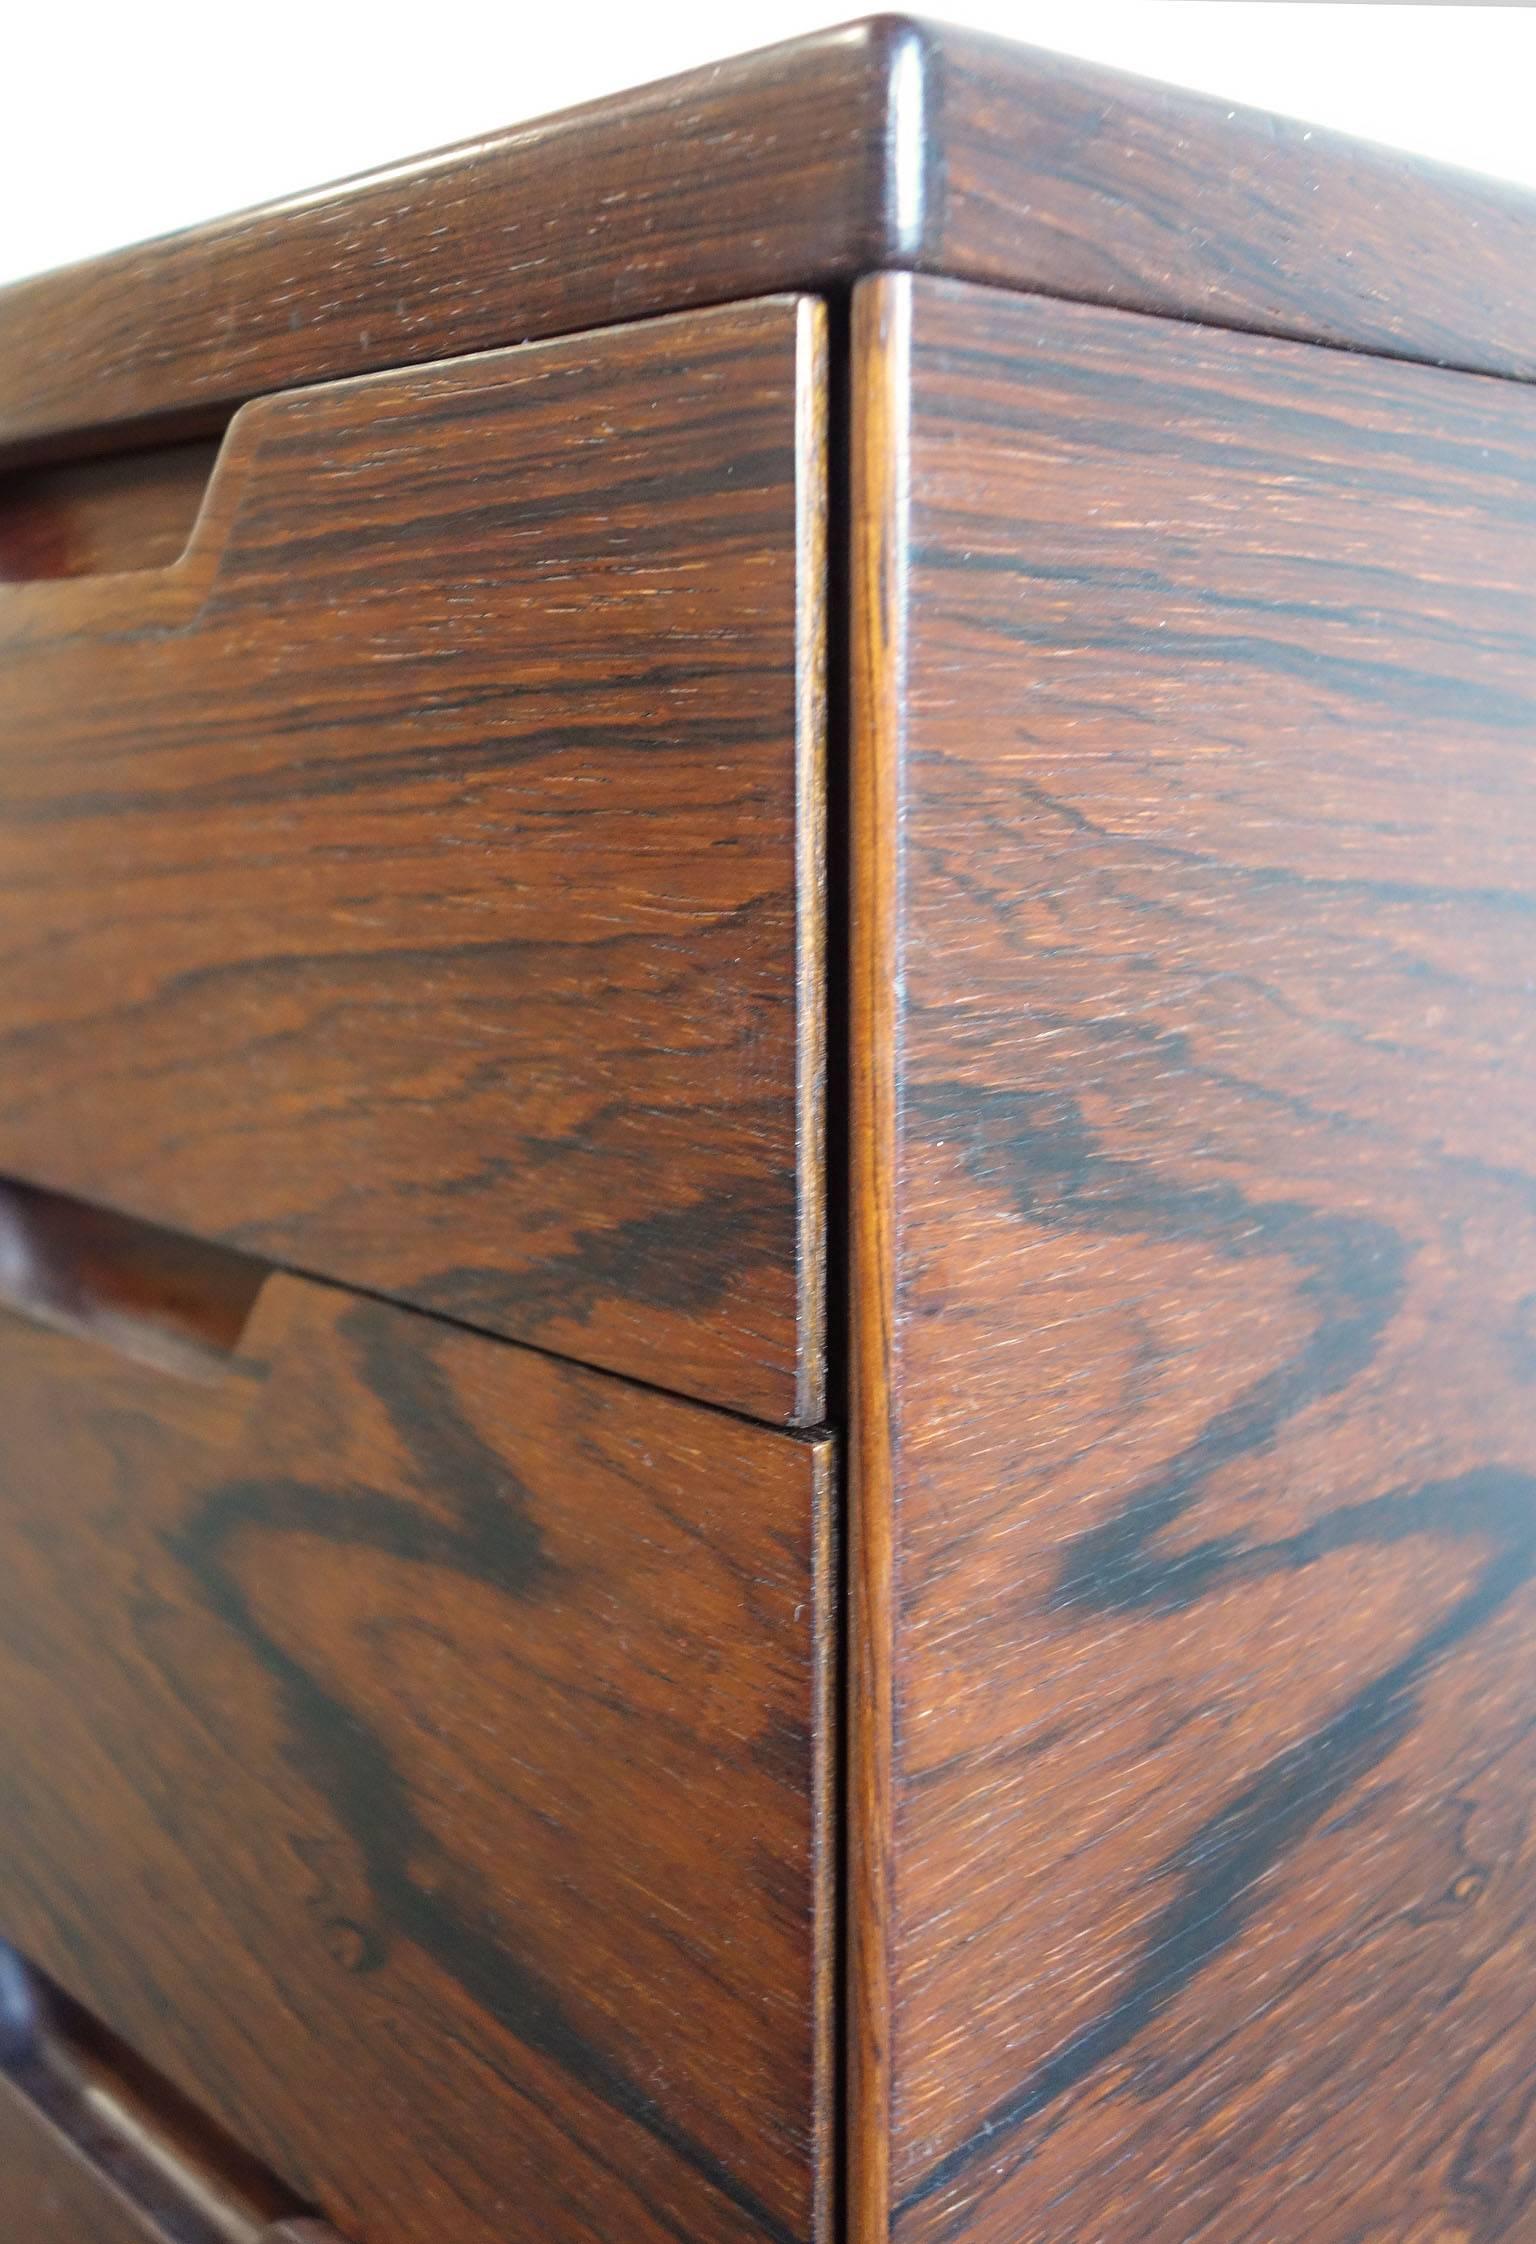 Highly desirable Mid-Century Svend Langkilde for Illums Bolighus rosewood chest of drawers or commode.
Rosewood is highly figured and vibrant. Makers mark affixed to the back. 
One of a pair available.